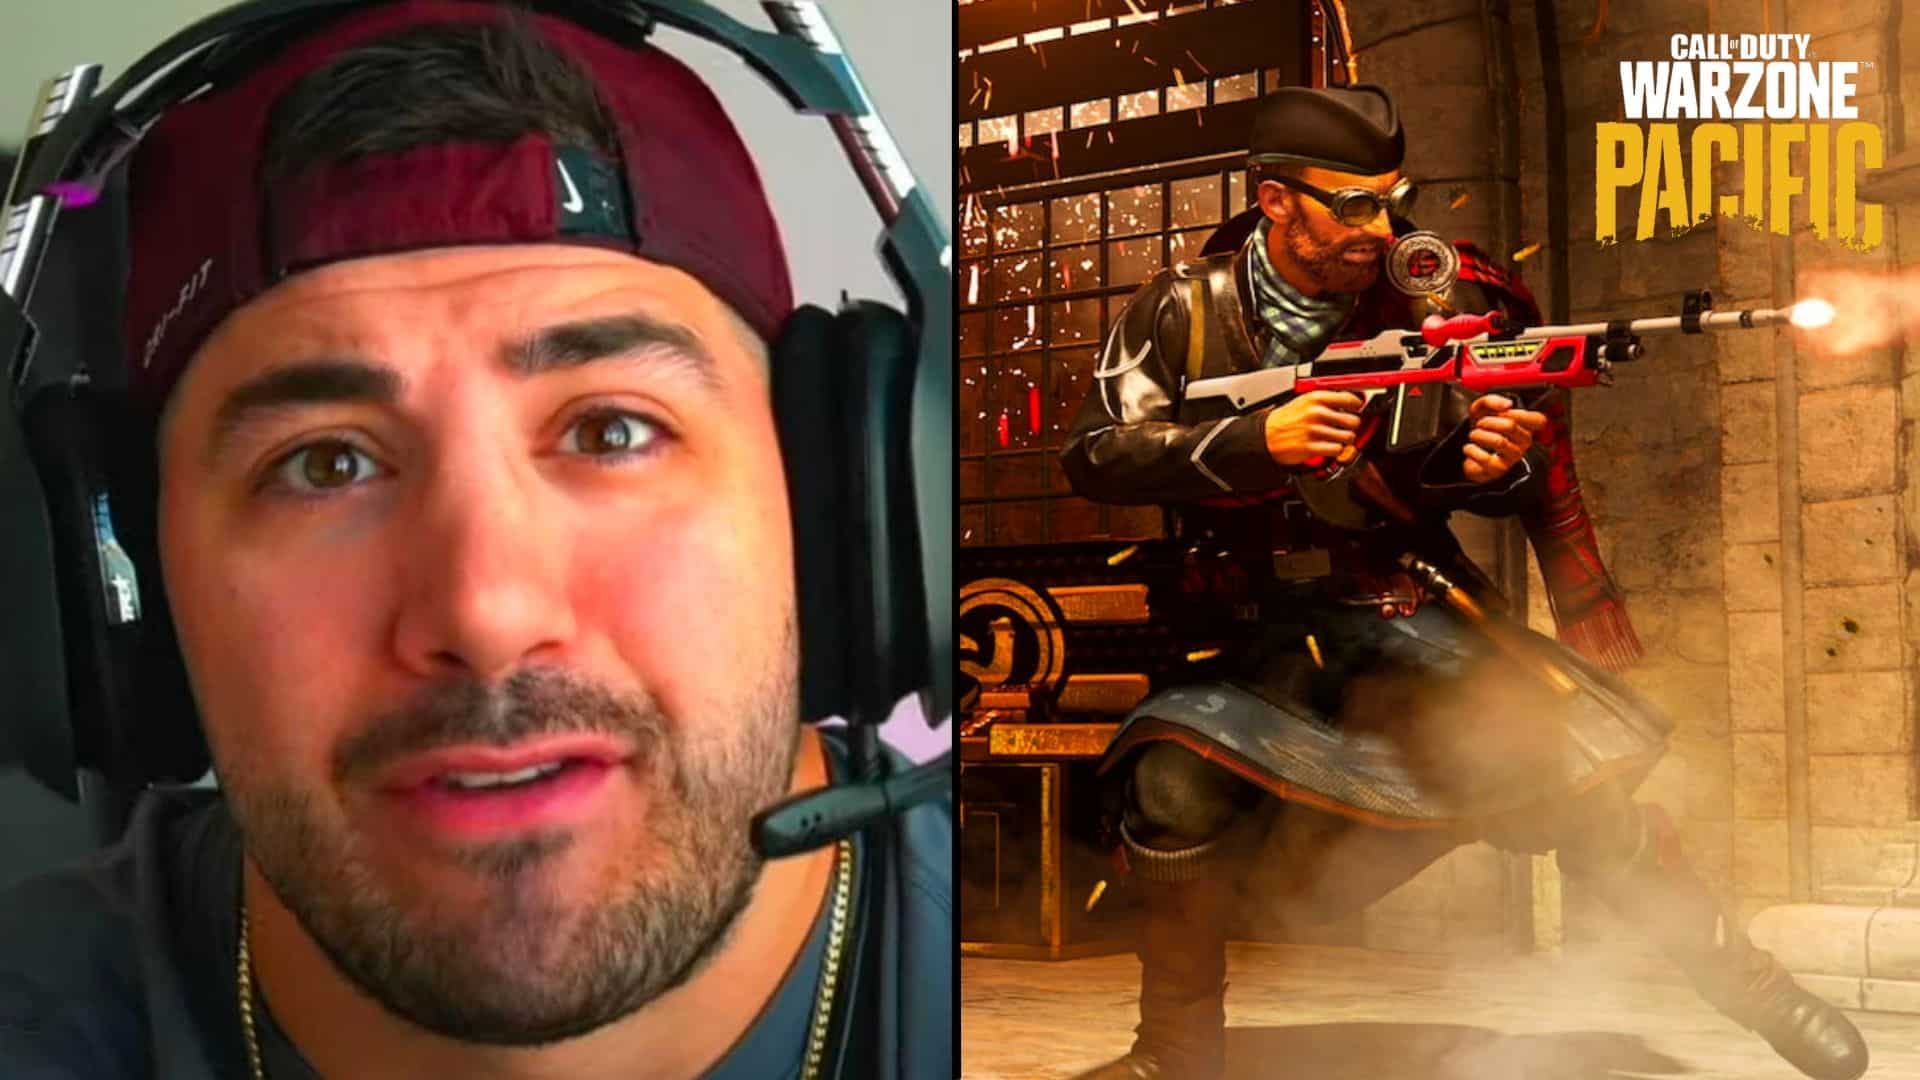 Nickmercs side by side with Warzone character on Fortune's Keep map